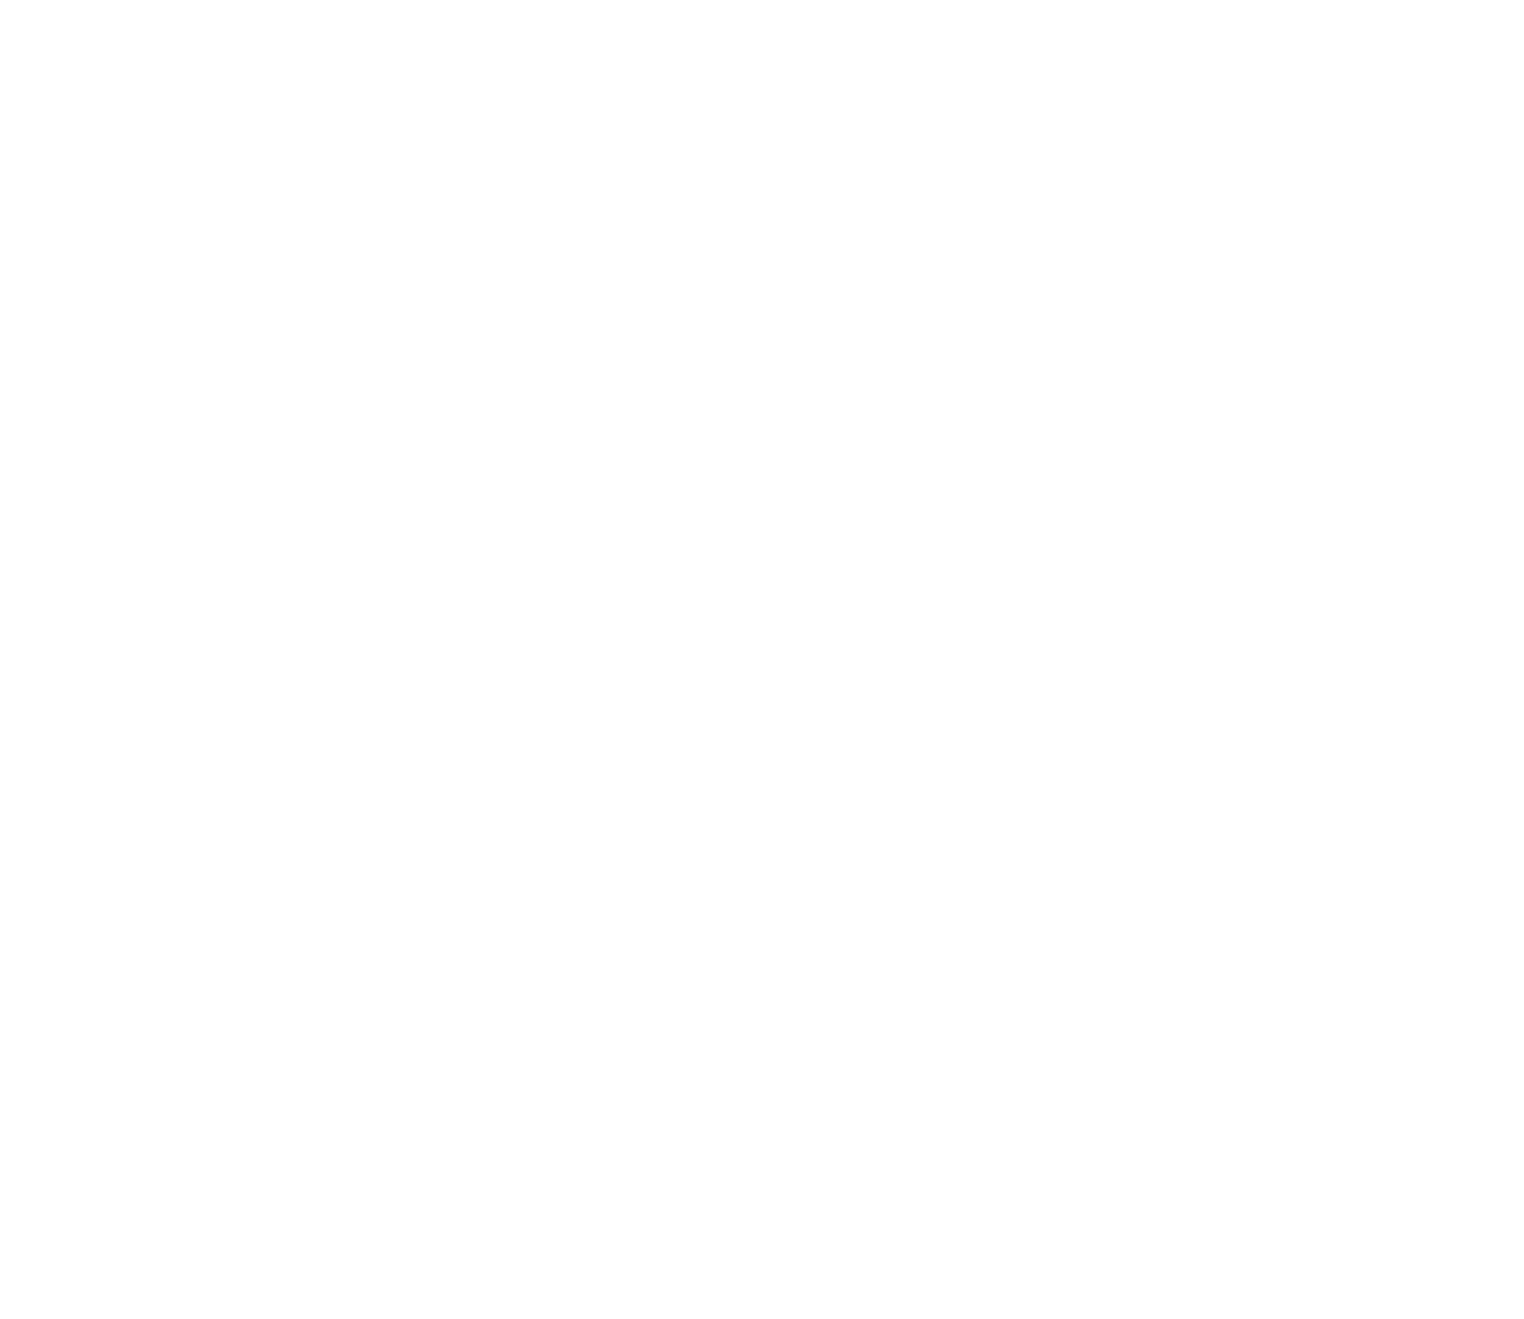 Beach Energy logo large for dark backgrounds (transparent PNG)